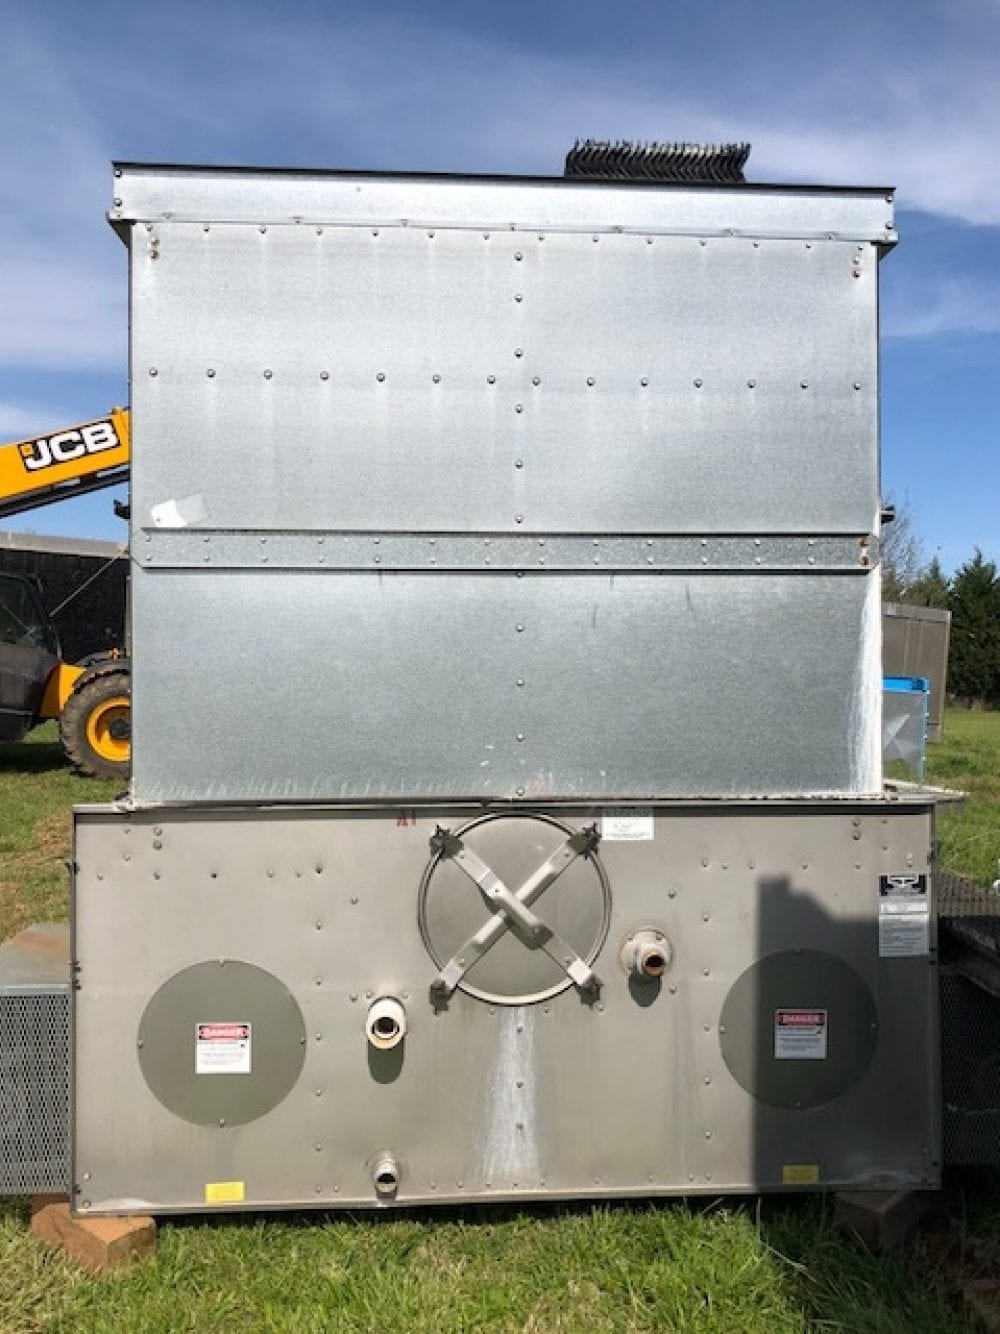 bac cooling tower serial number age